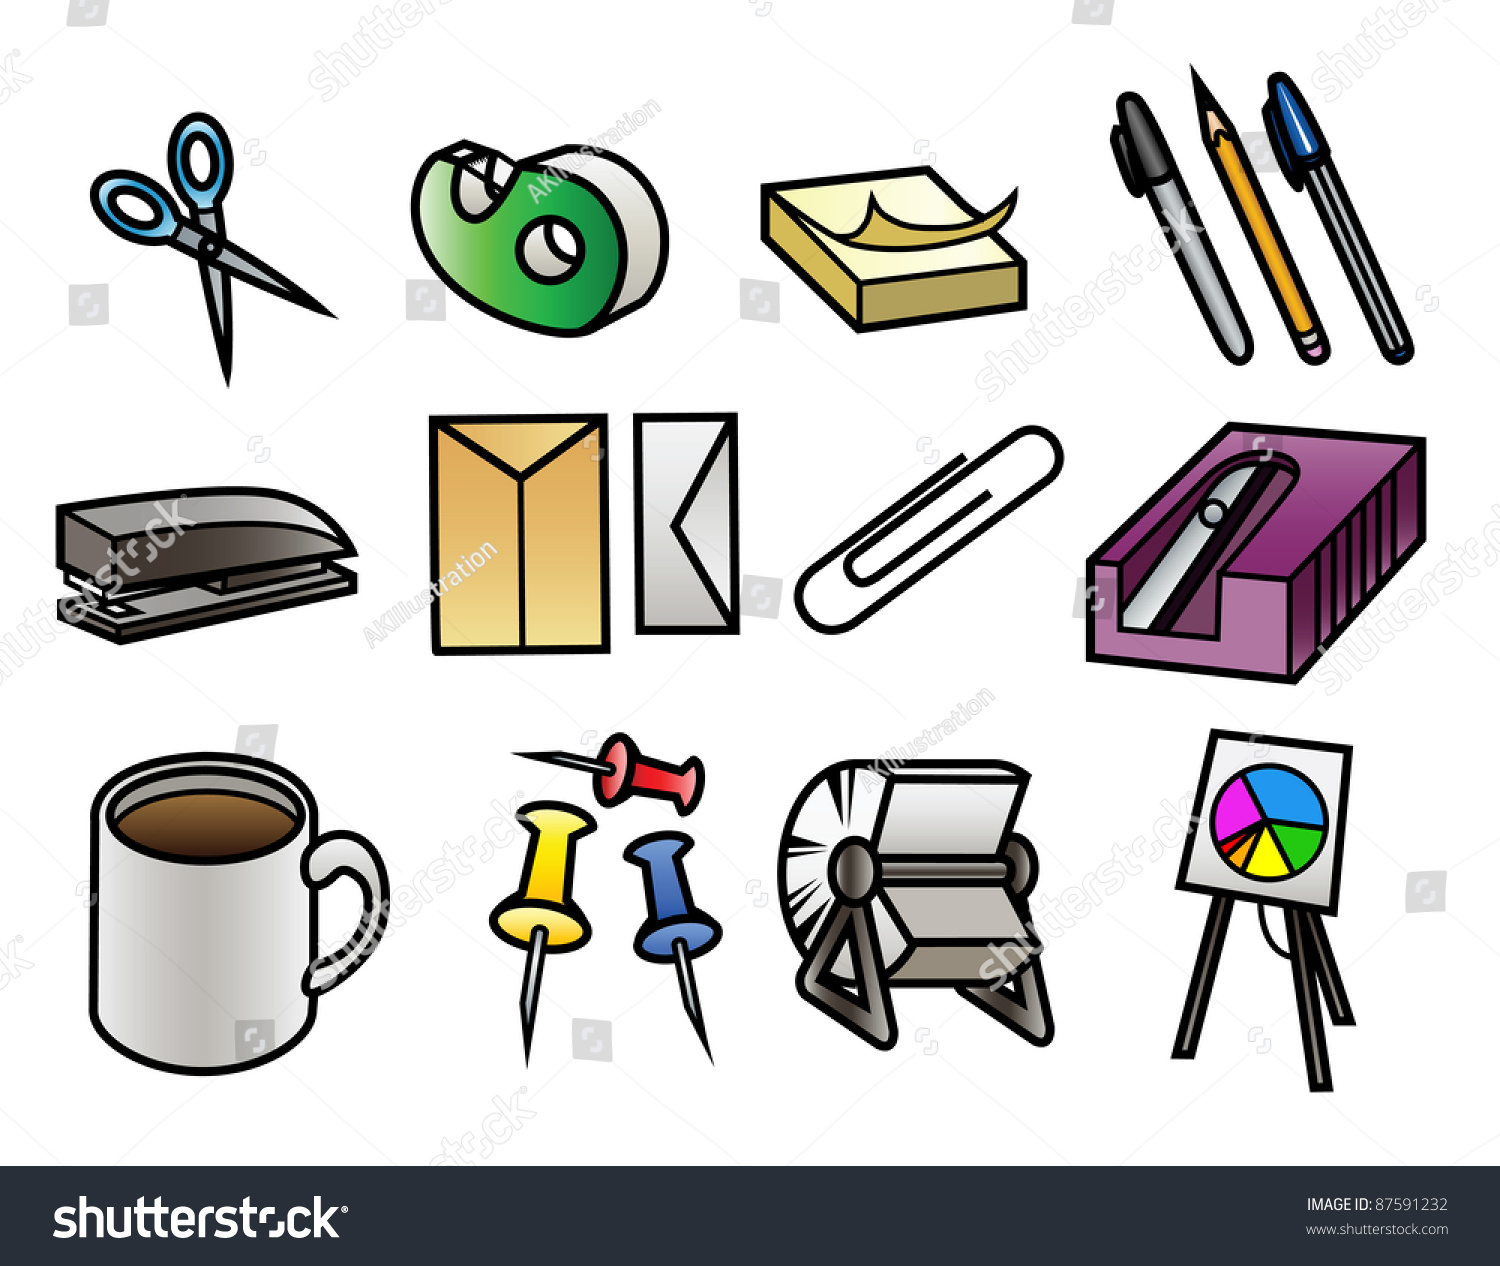 office equipment clipart - photo #35